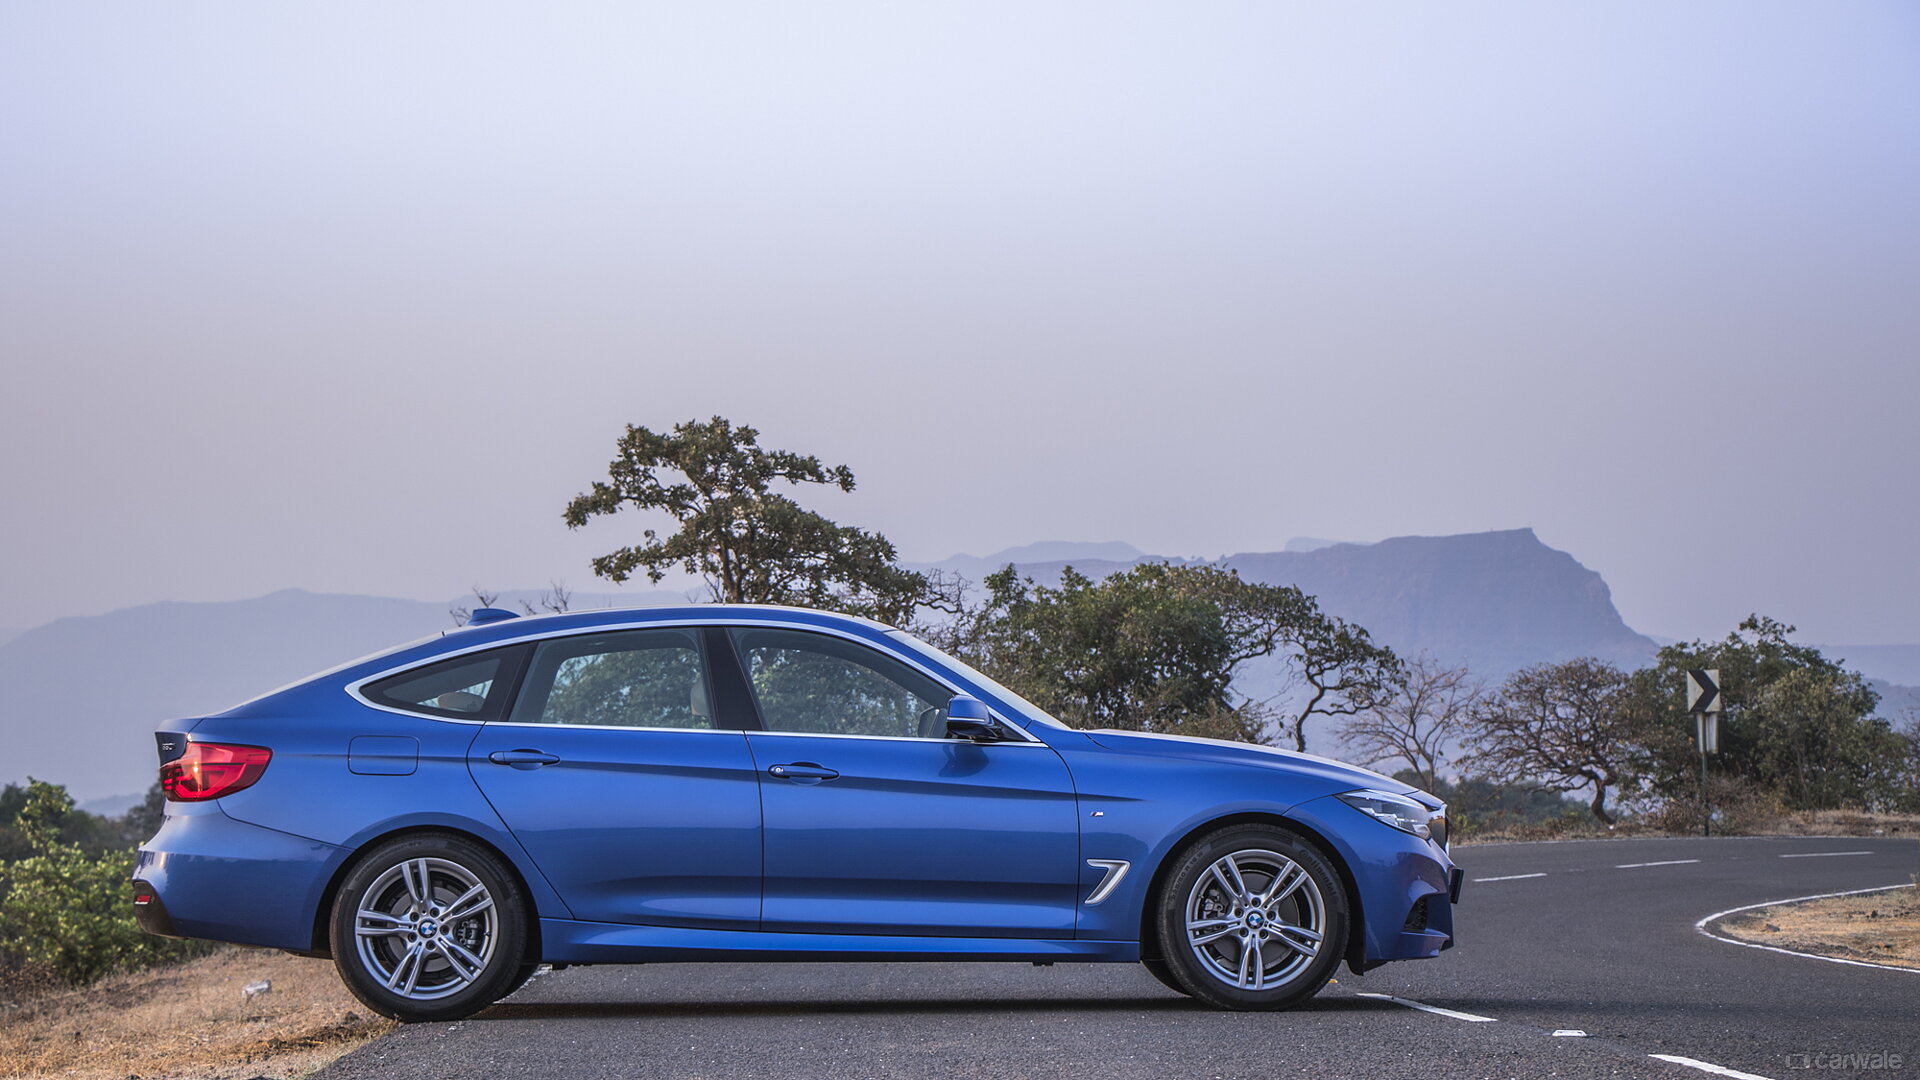 3 Series GT Exterior Image, 3 Series GT Photos in India